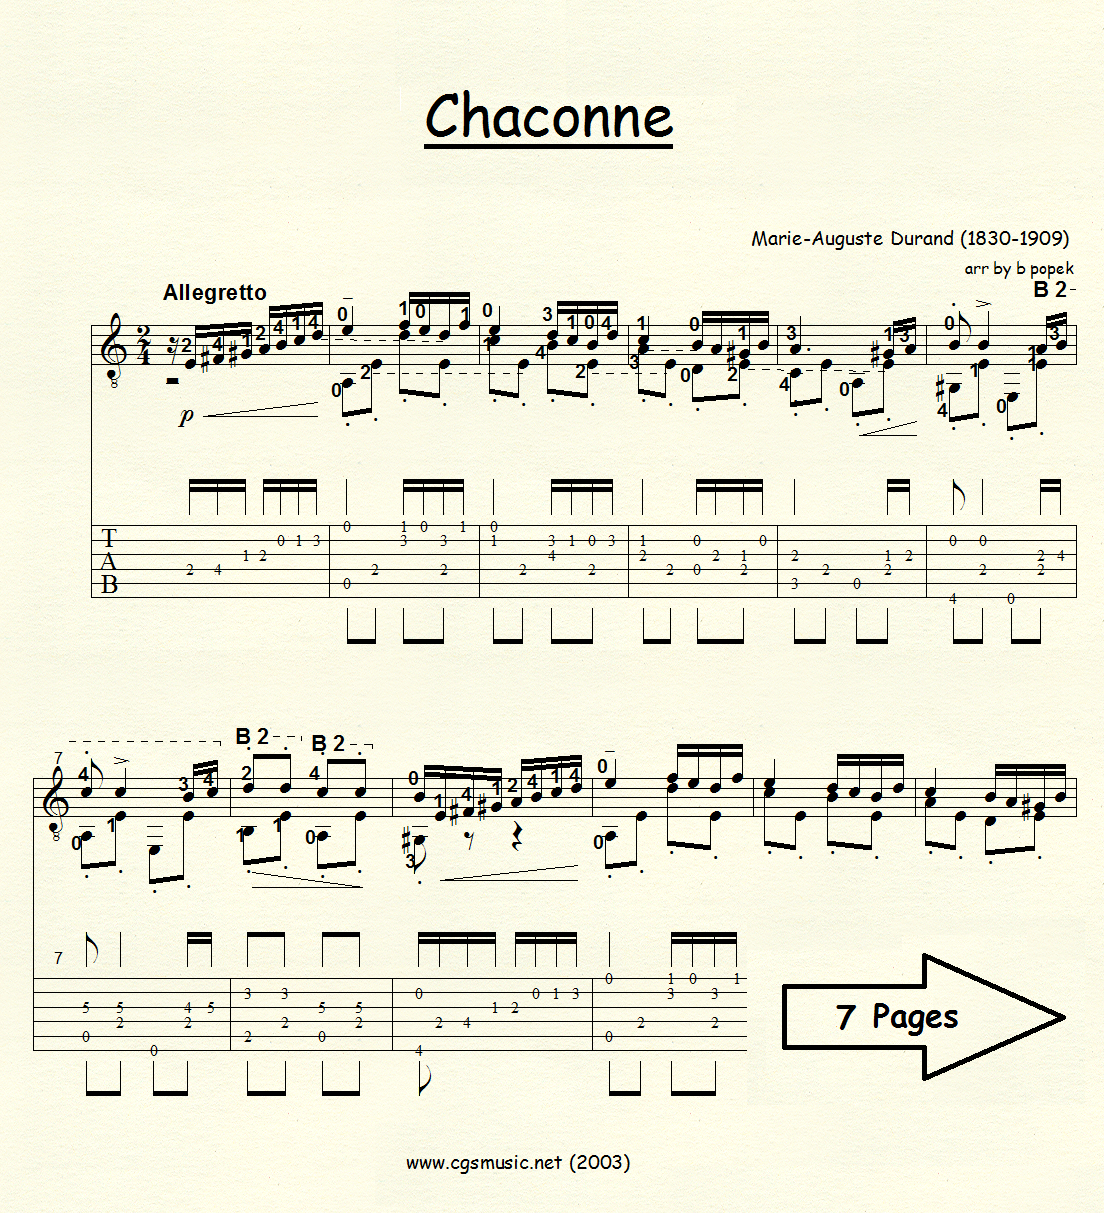 Chaconne (Durand) for Classical Guitar in Tablature